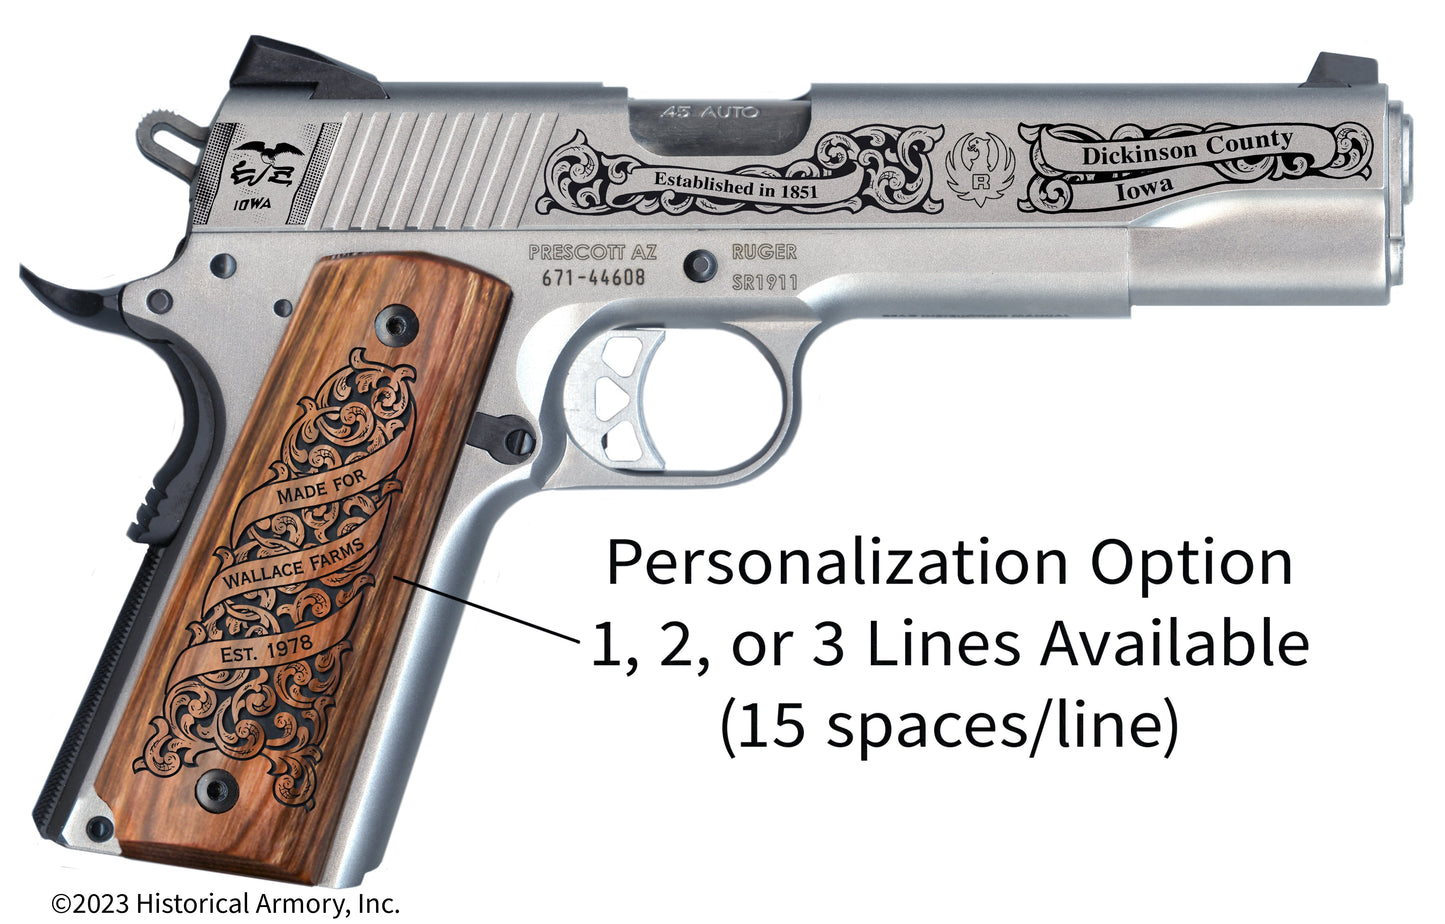 Dickinson County Iowa Personalized Engraved .45 Auto Ruger 1911